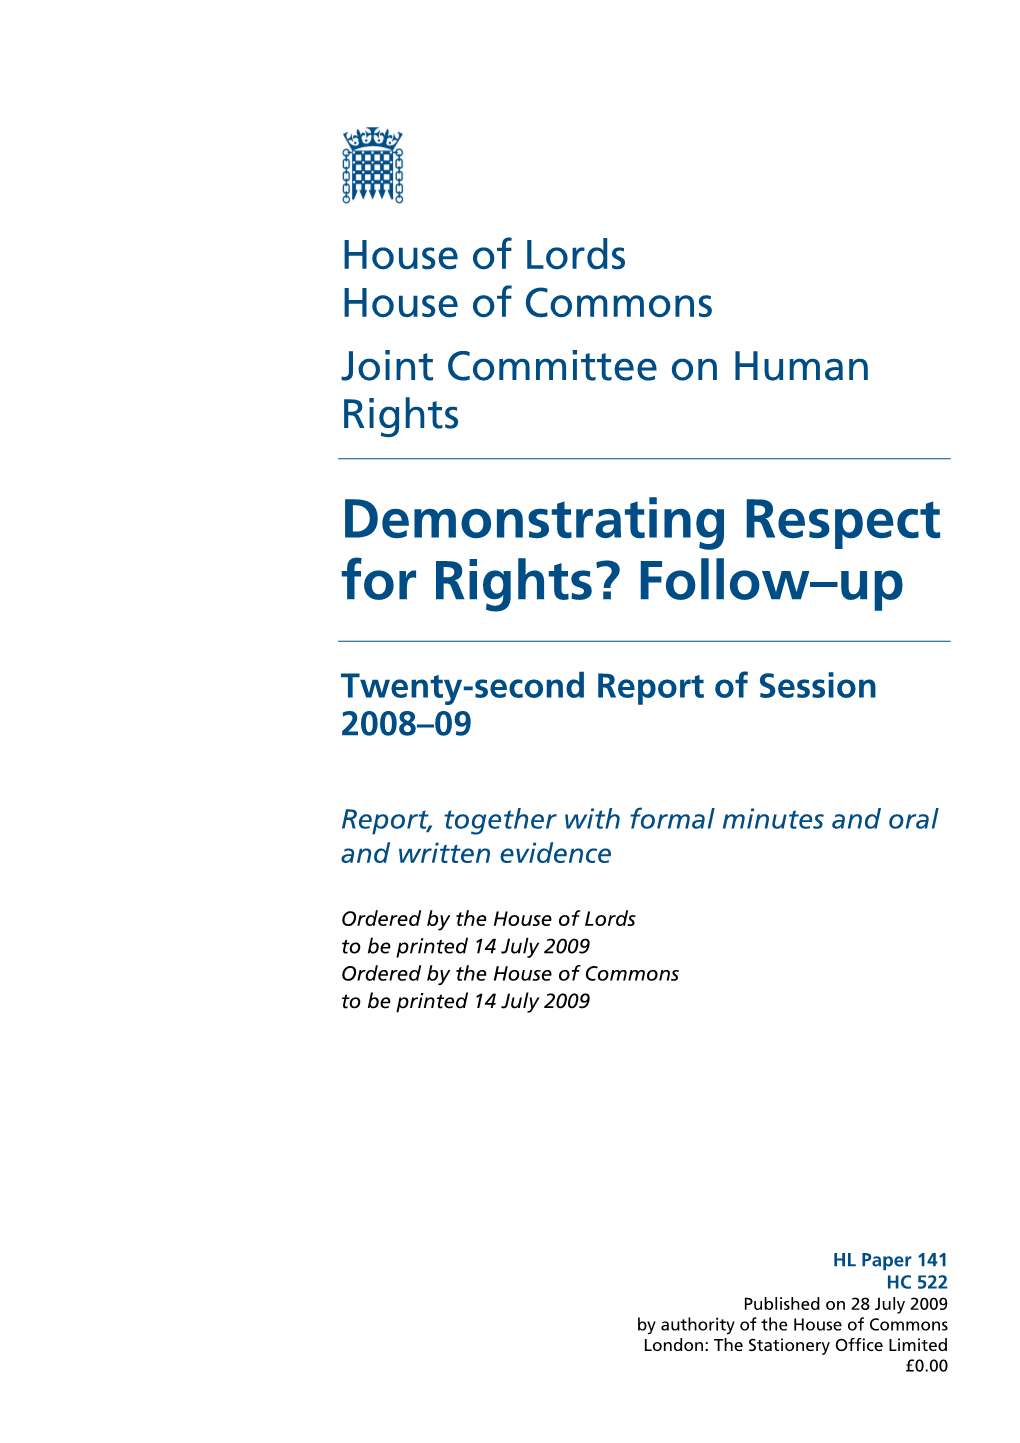 Joint Committee on Human Rights